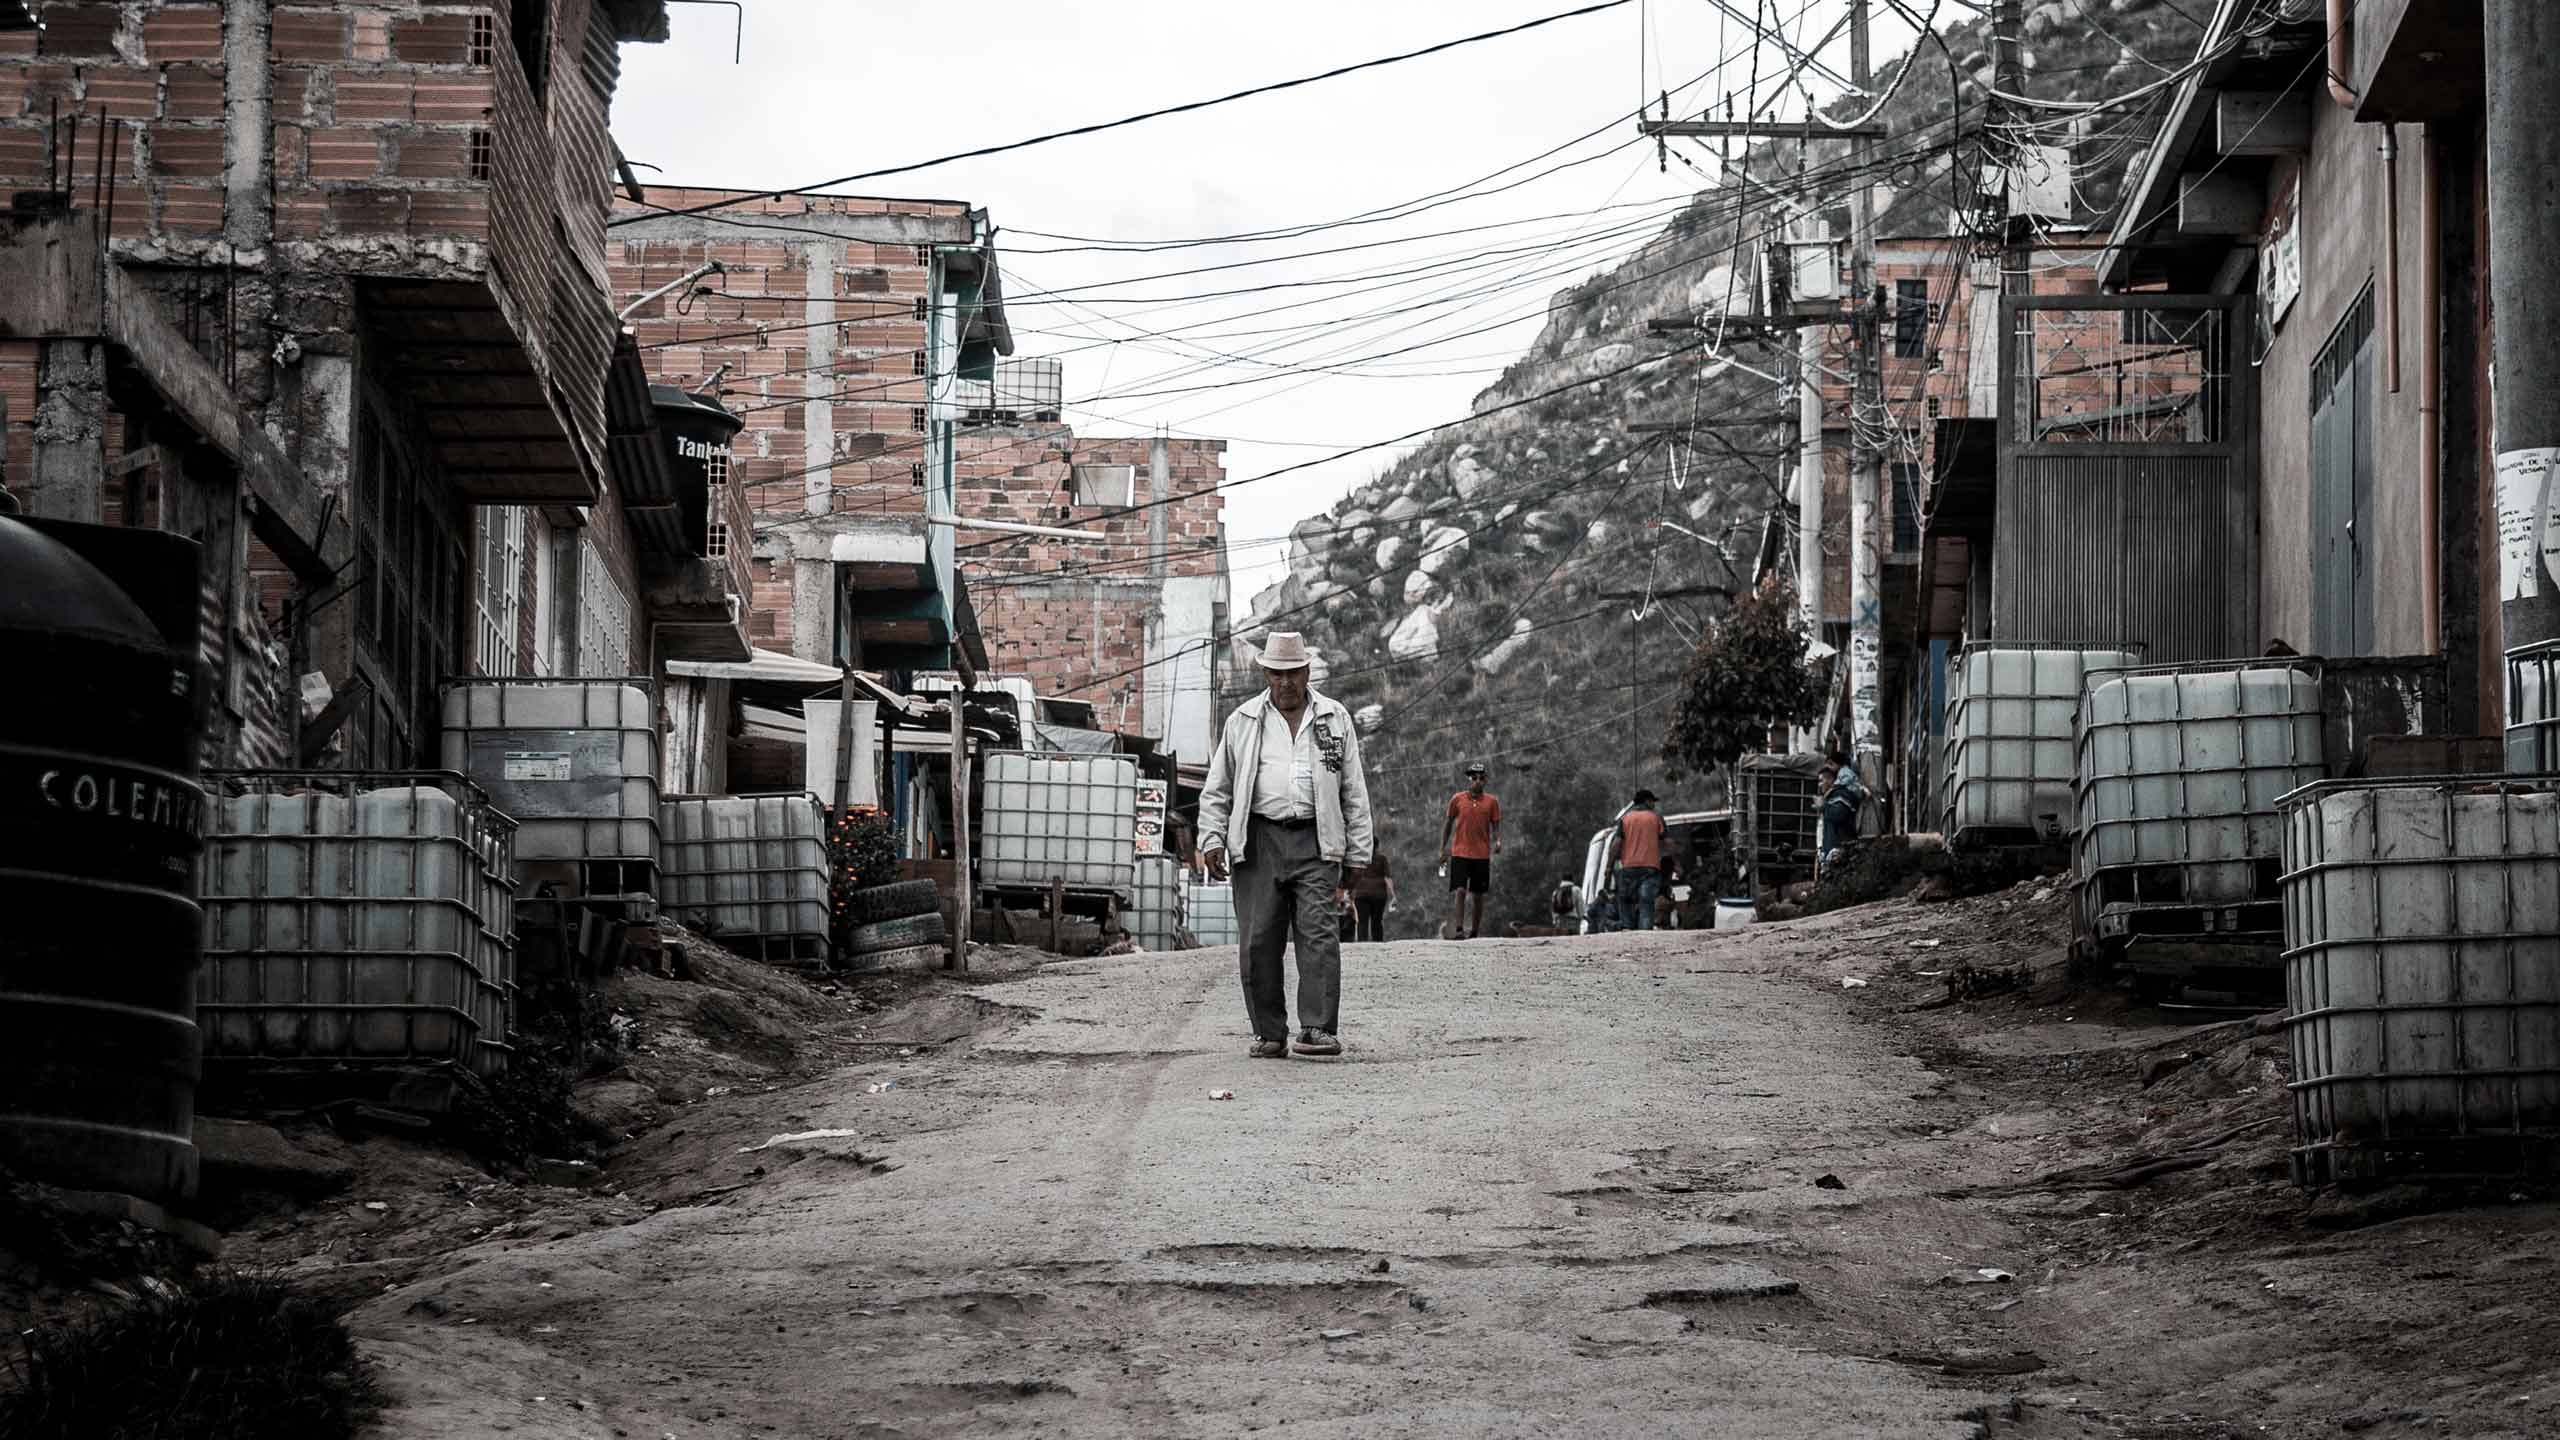 A man in a cowboy hat walking down a street with makeshift dwellings